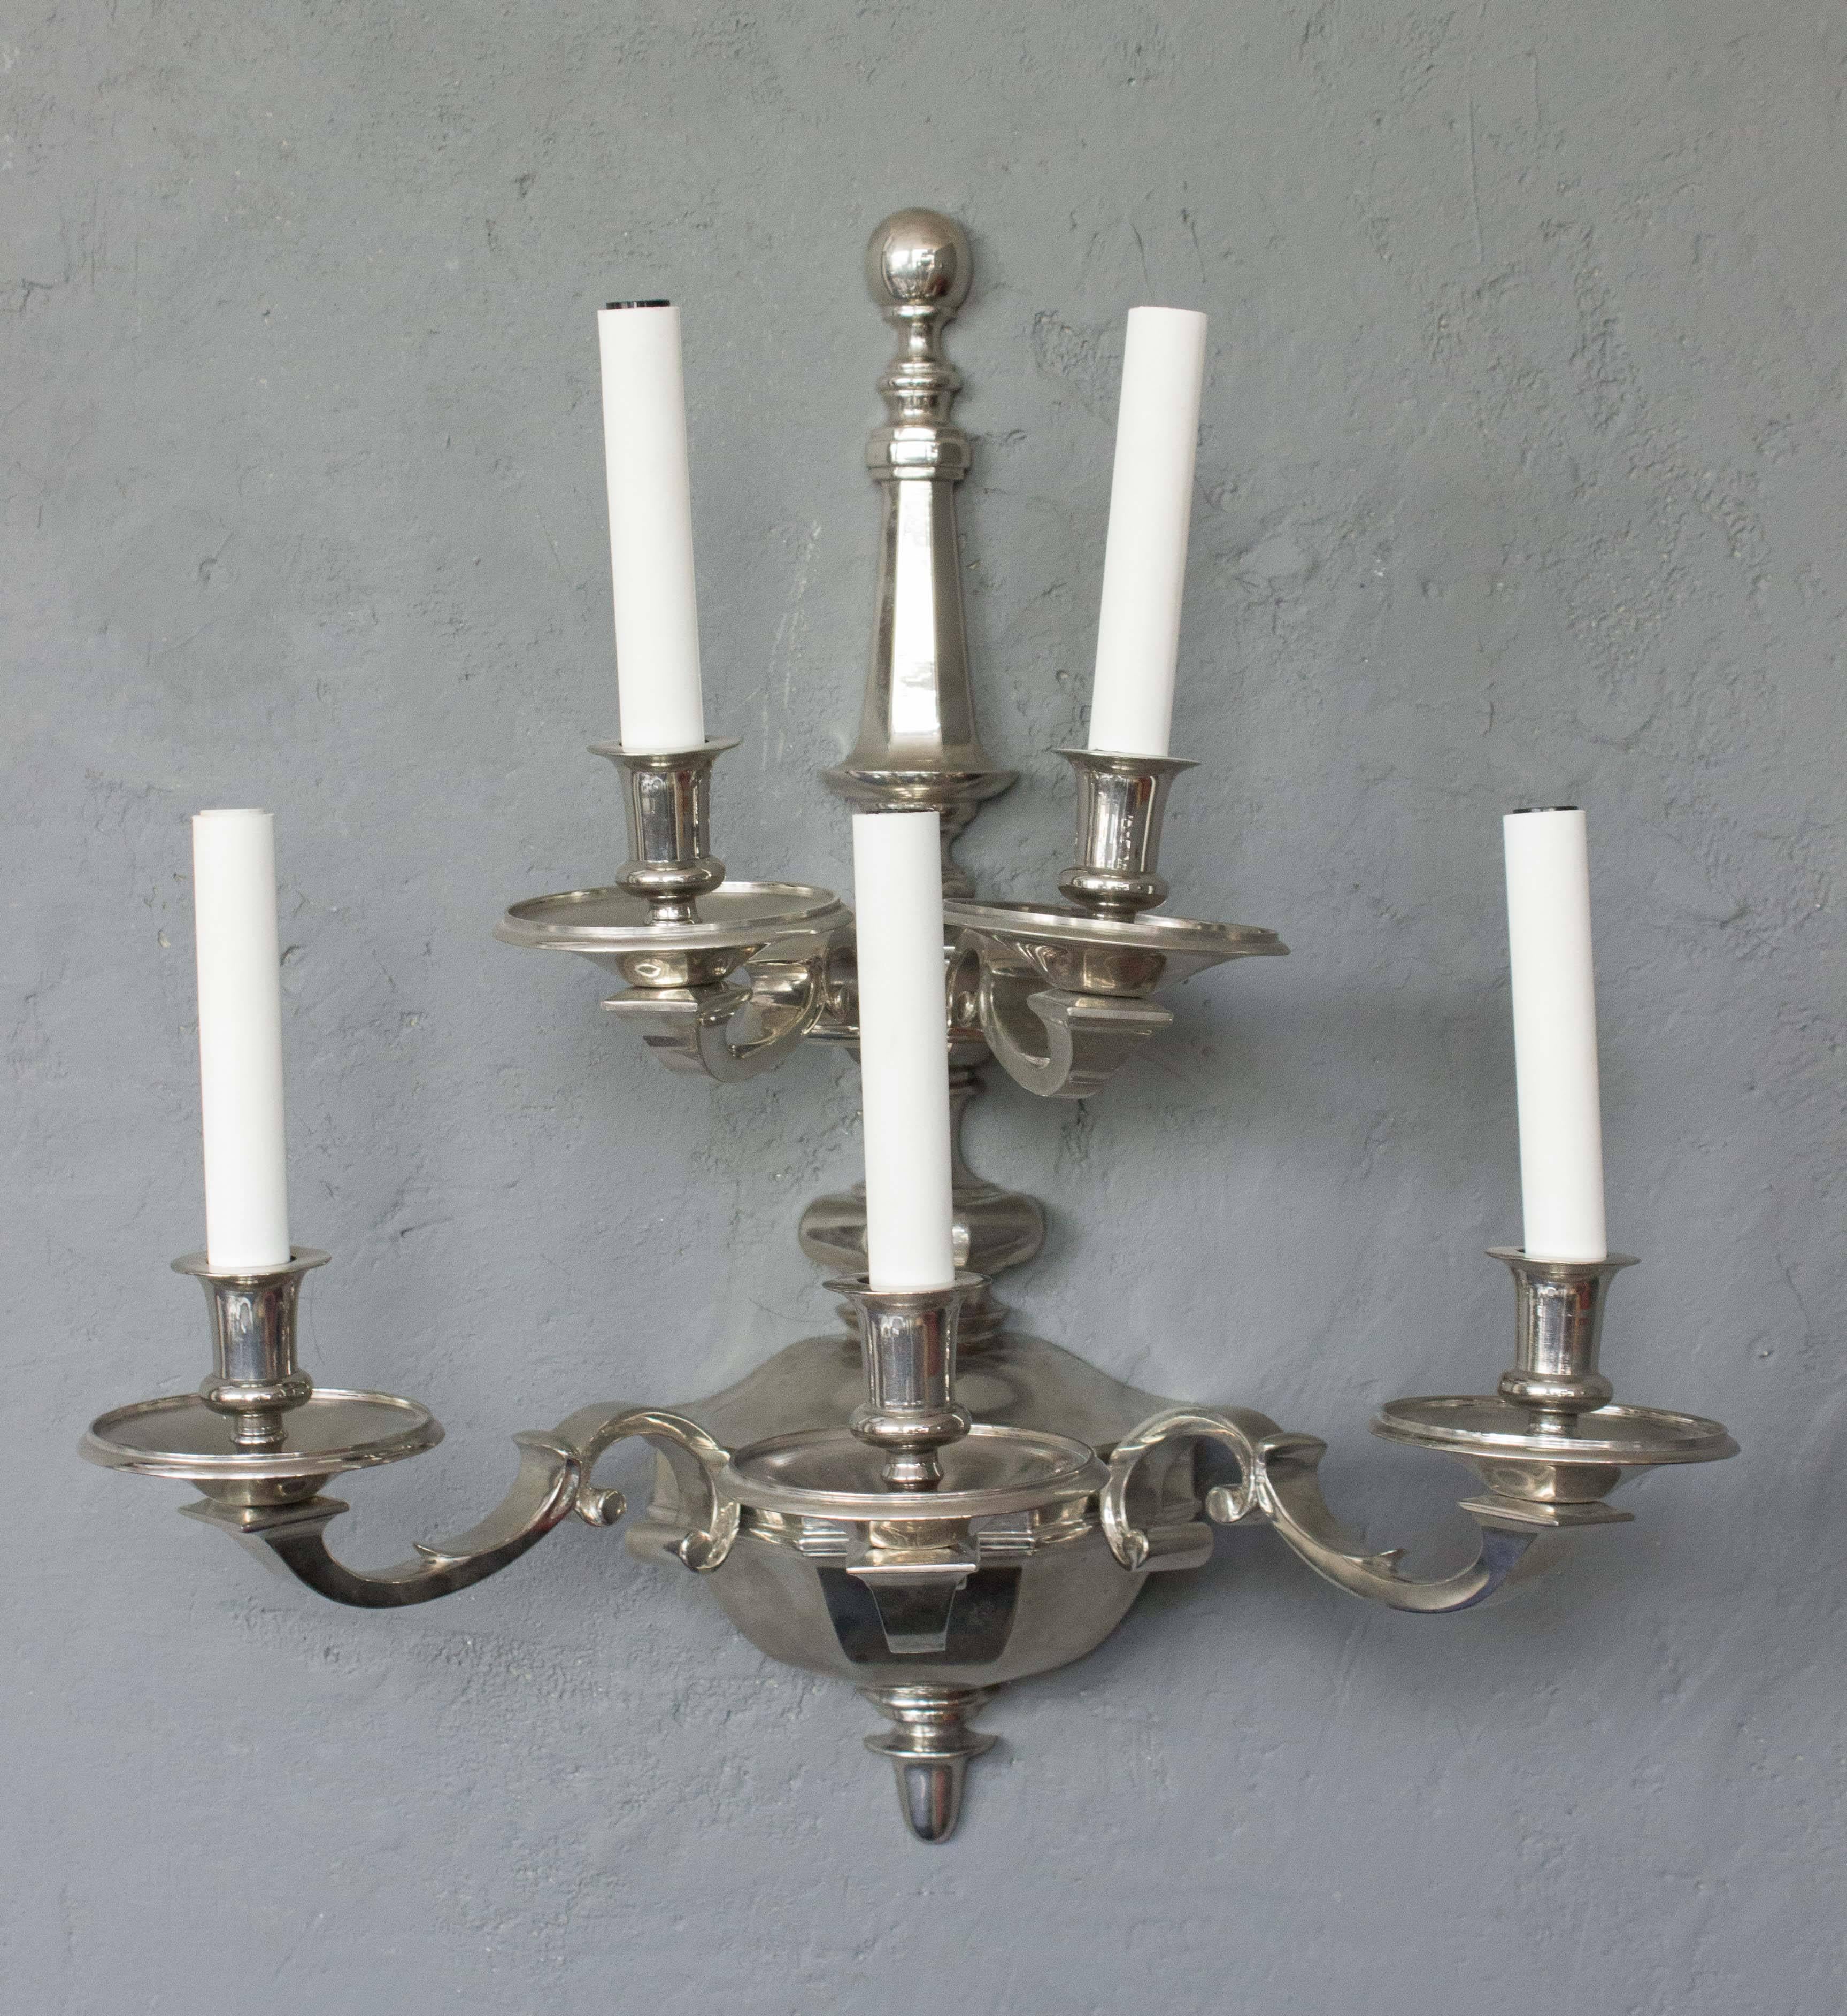 This pair of French sconces from the 1940s is an epitome of elegance and classic Neo-Baroque style. Featuring a two-tiered design with five arms on each piece, they are composed of nickel-plated bronze, a testament to their vintage charm. While